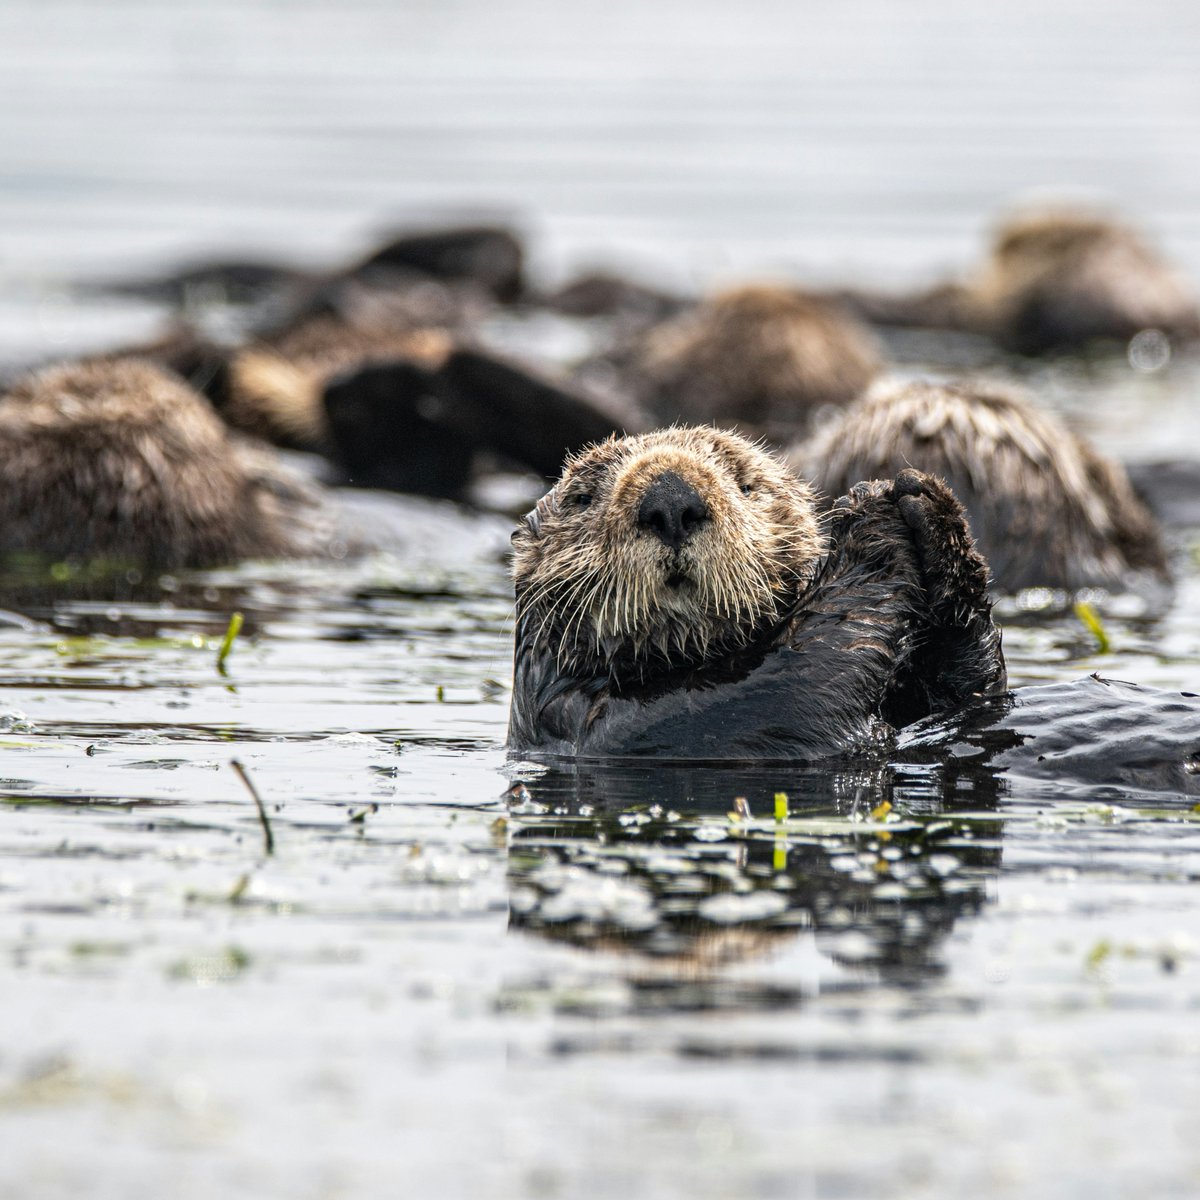 Some good news for your tuesday afternoon feed 👇 A study is showing that sea otters have been crucial for the survival of kelp forests in Central California. These creatures aren't just cute, they're also climate change fighters 💪 Learn more: bit.ly/49K3Owp